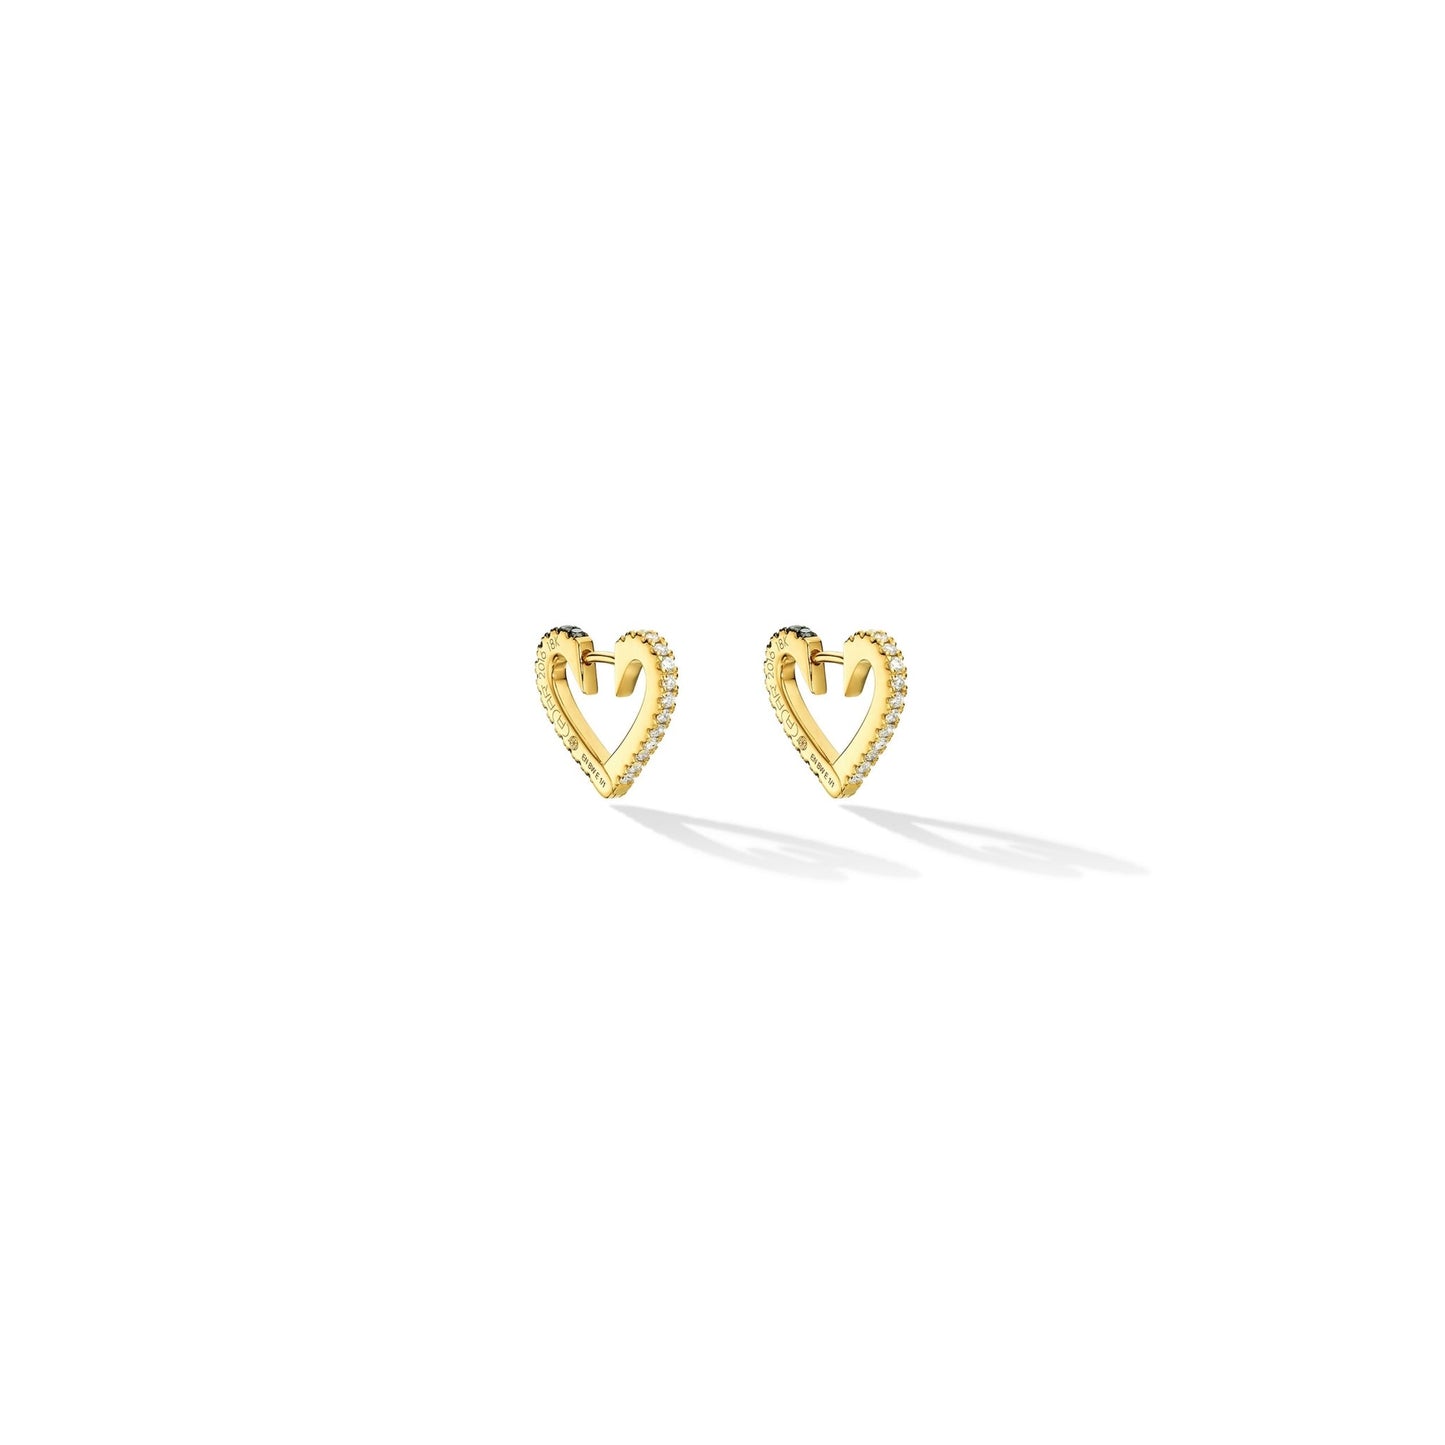 Small Yellow Gold Endless Hoop Earrings with Black and White Diamonds - Cadar